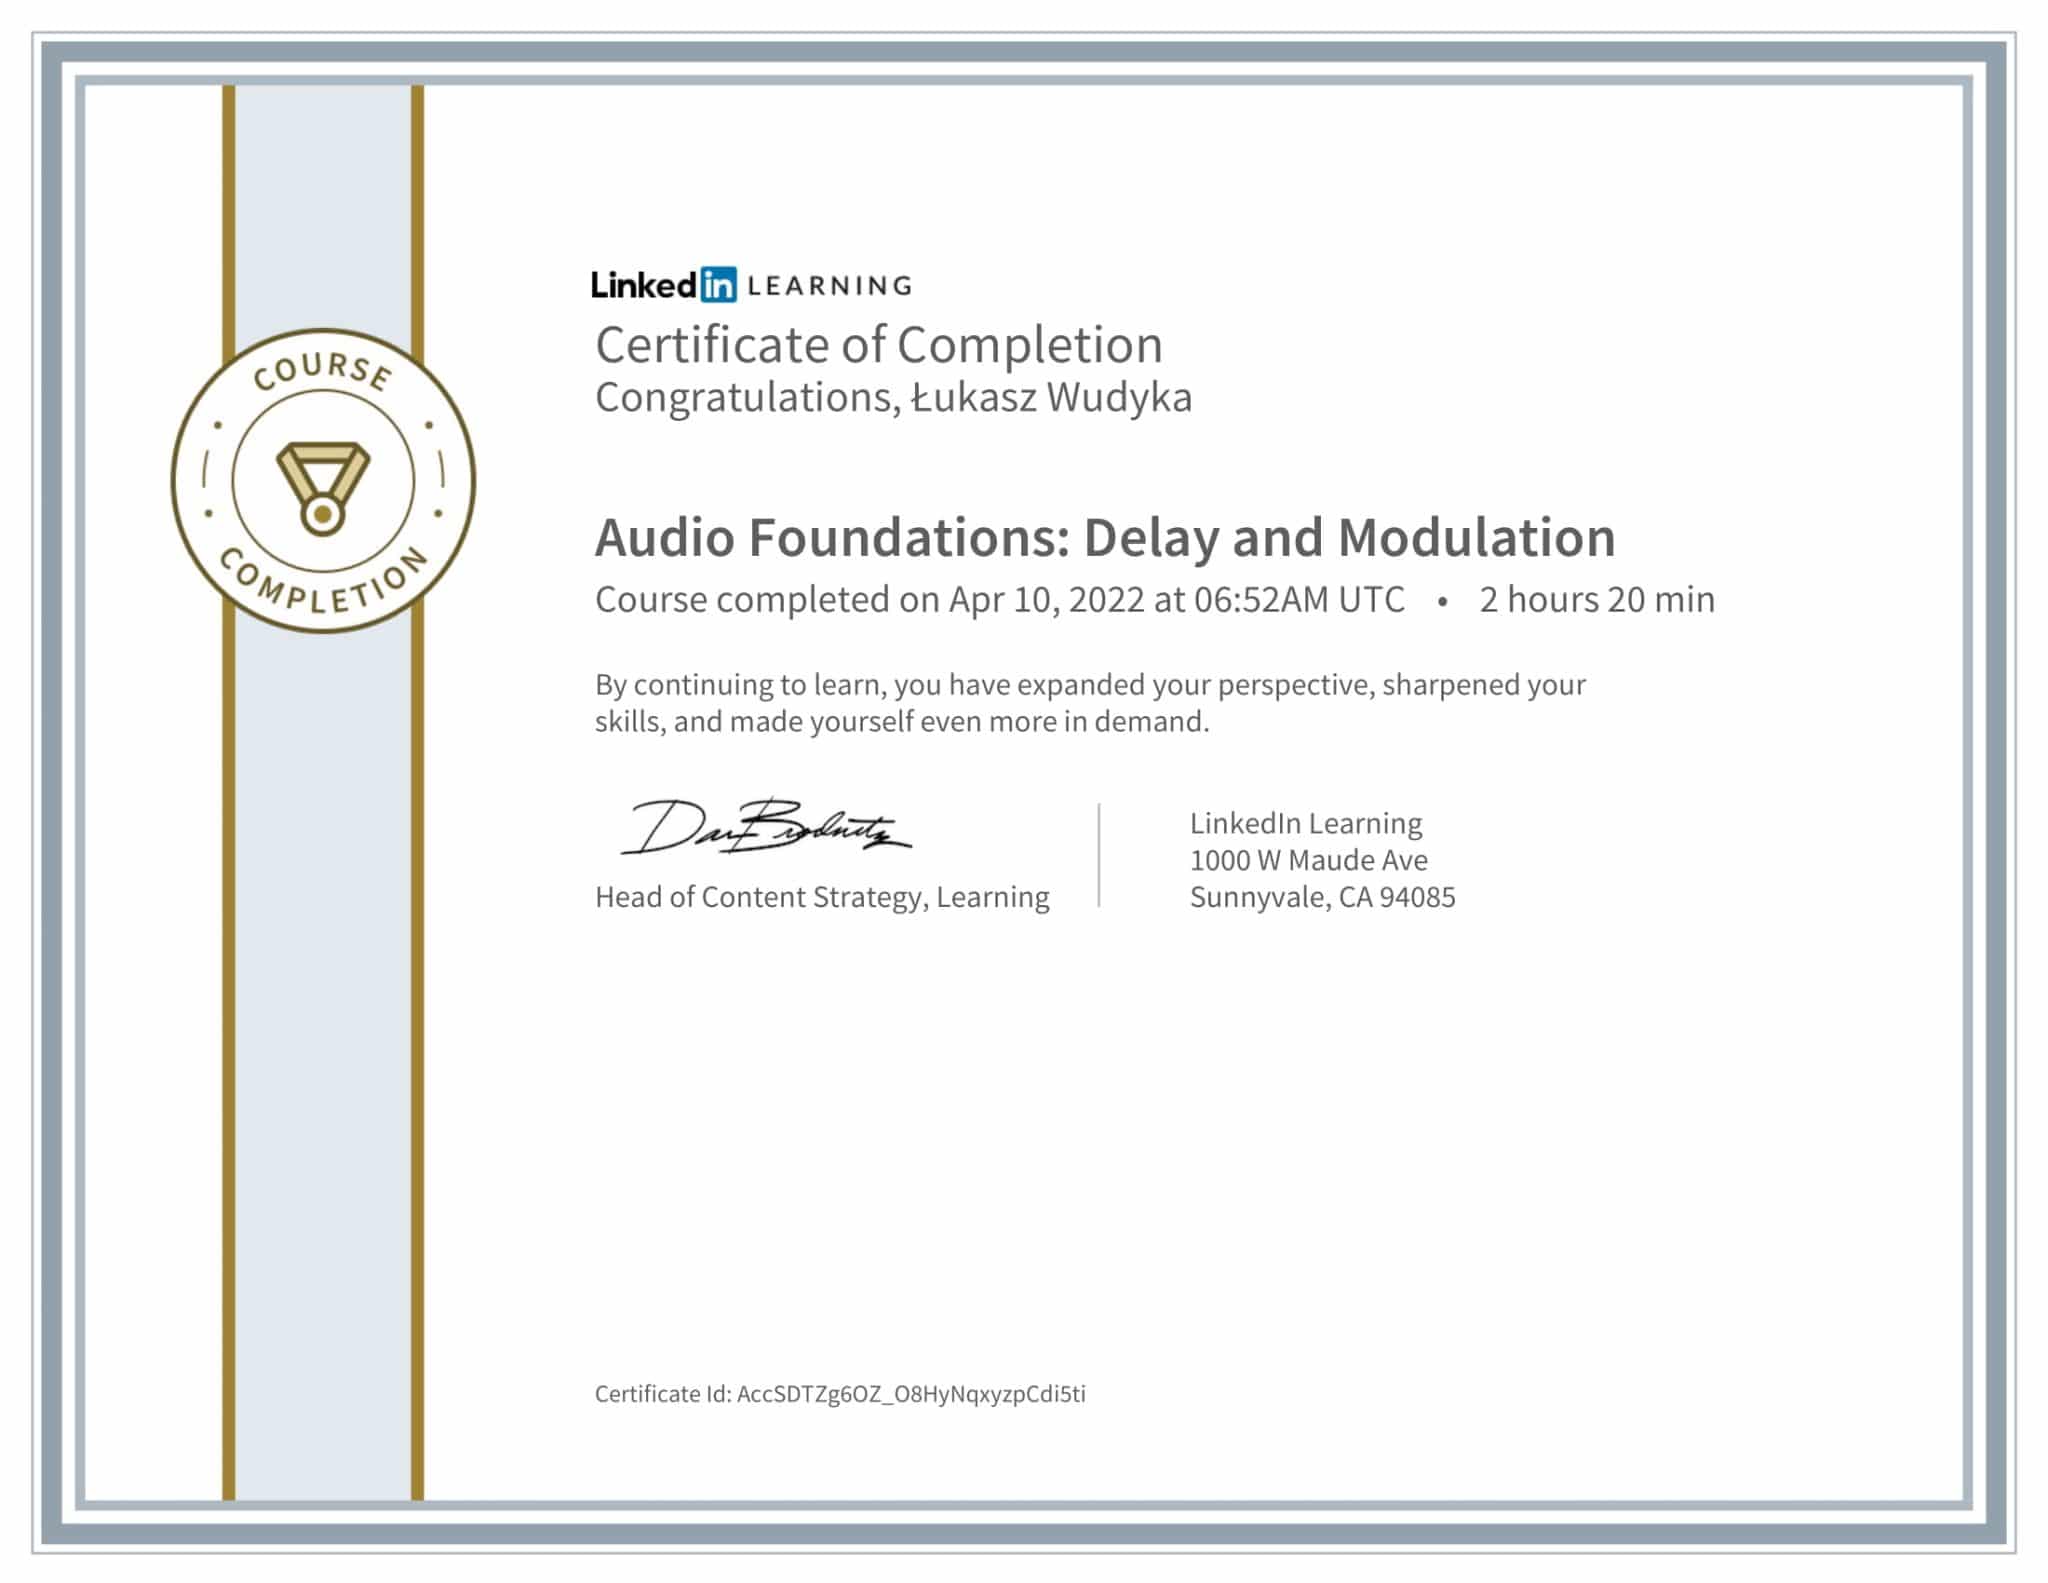 CertificateOfCompletion_Audio Foundations Delay and Modulation-1